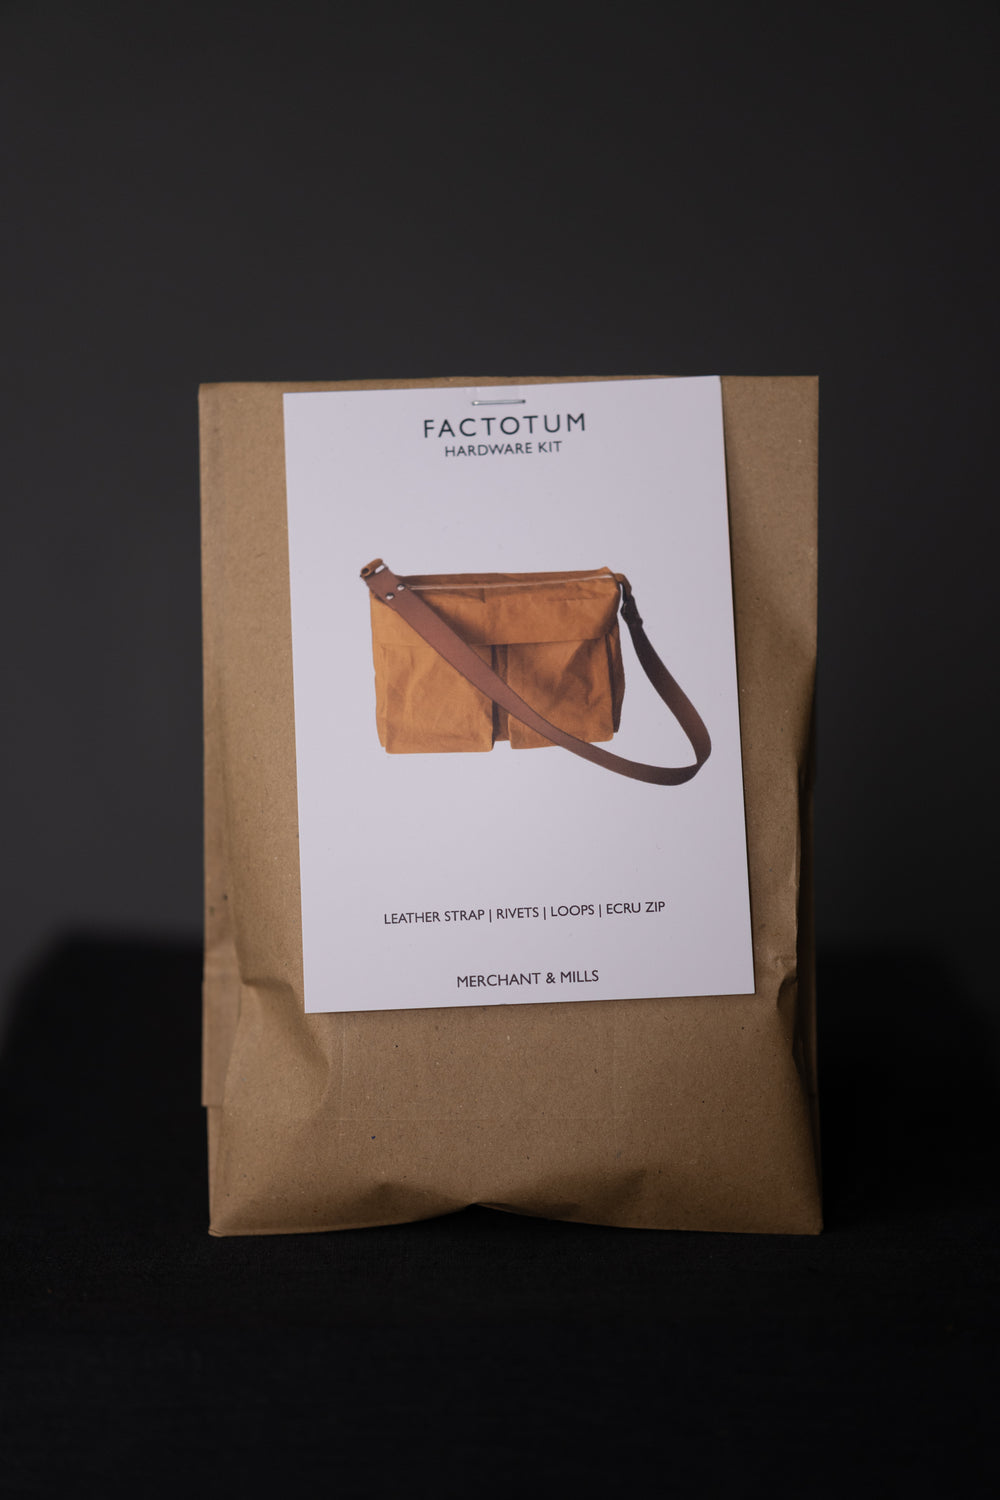 Photo showing the Factotum Bag from Merchant & Mills on The Fold Line. The kit includes hardware for the bag; 2 x 1″ loops, 4 x 9 mm rivets, 1 x 30 cm ecru and nickel zip, 1 x 1″ split cowhide leather strap. The metal finish is in Nickel.